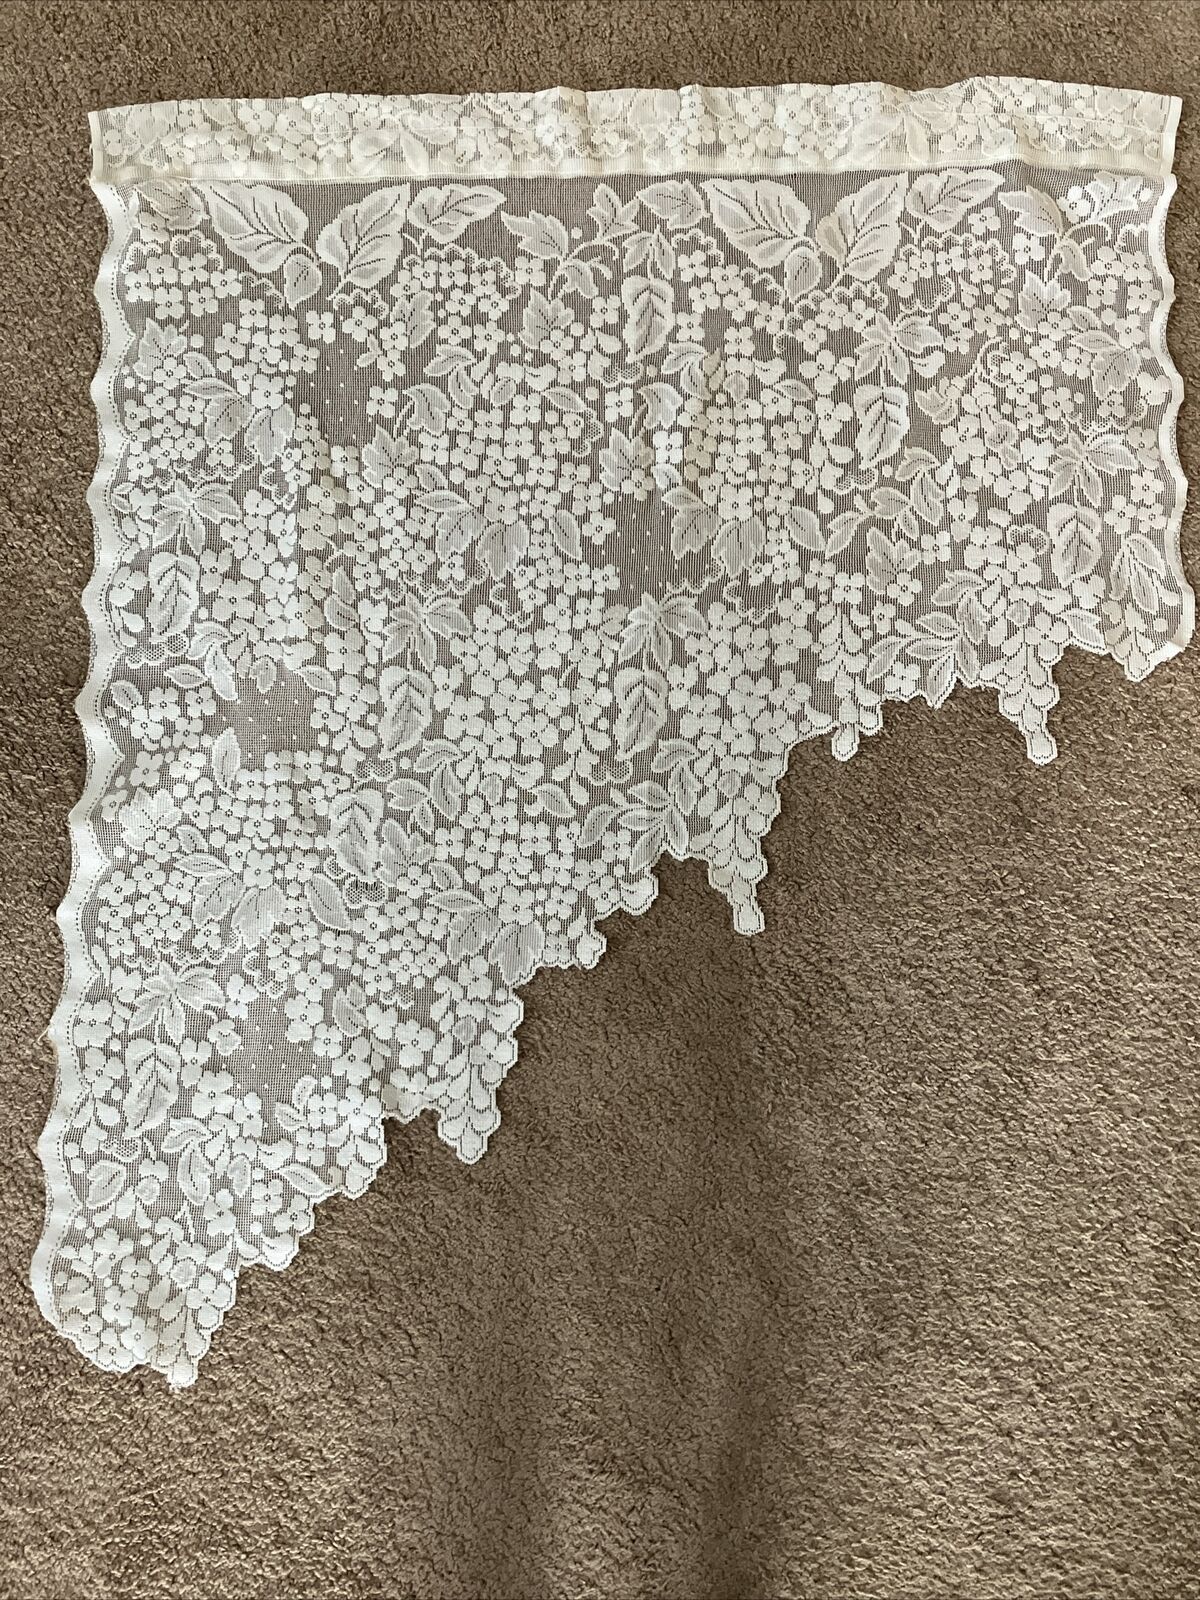 White Chantilly Lace Vintage Swag Curtain Decor Piece 39” X 35” Rod Panel